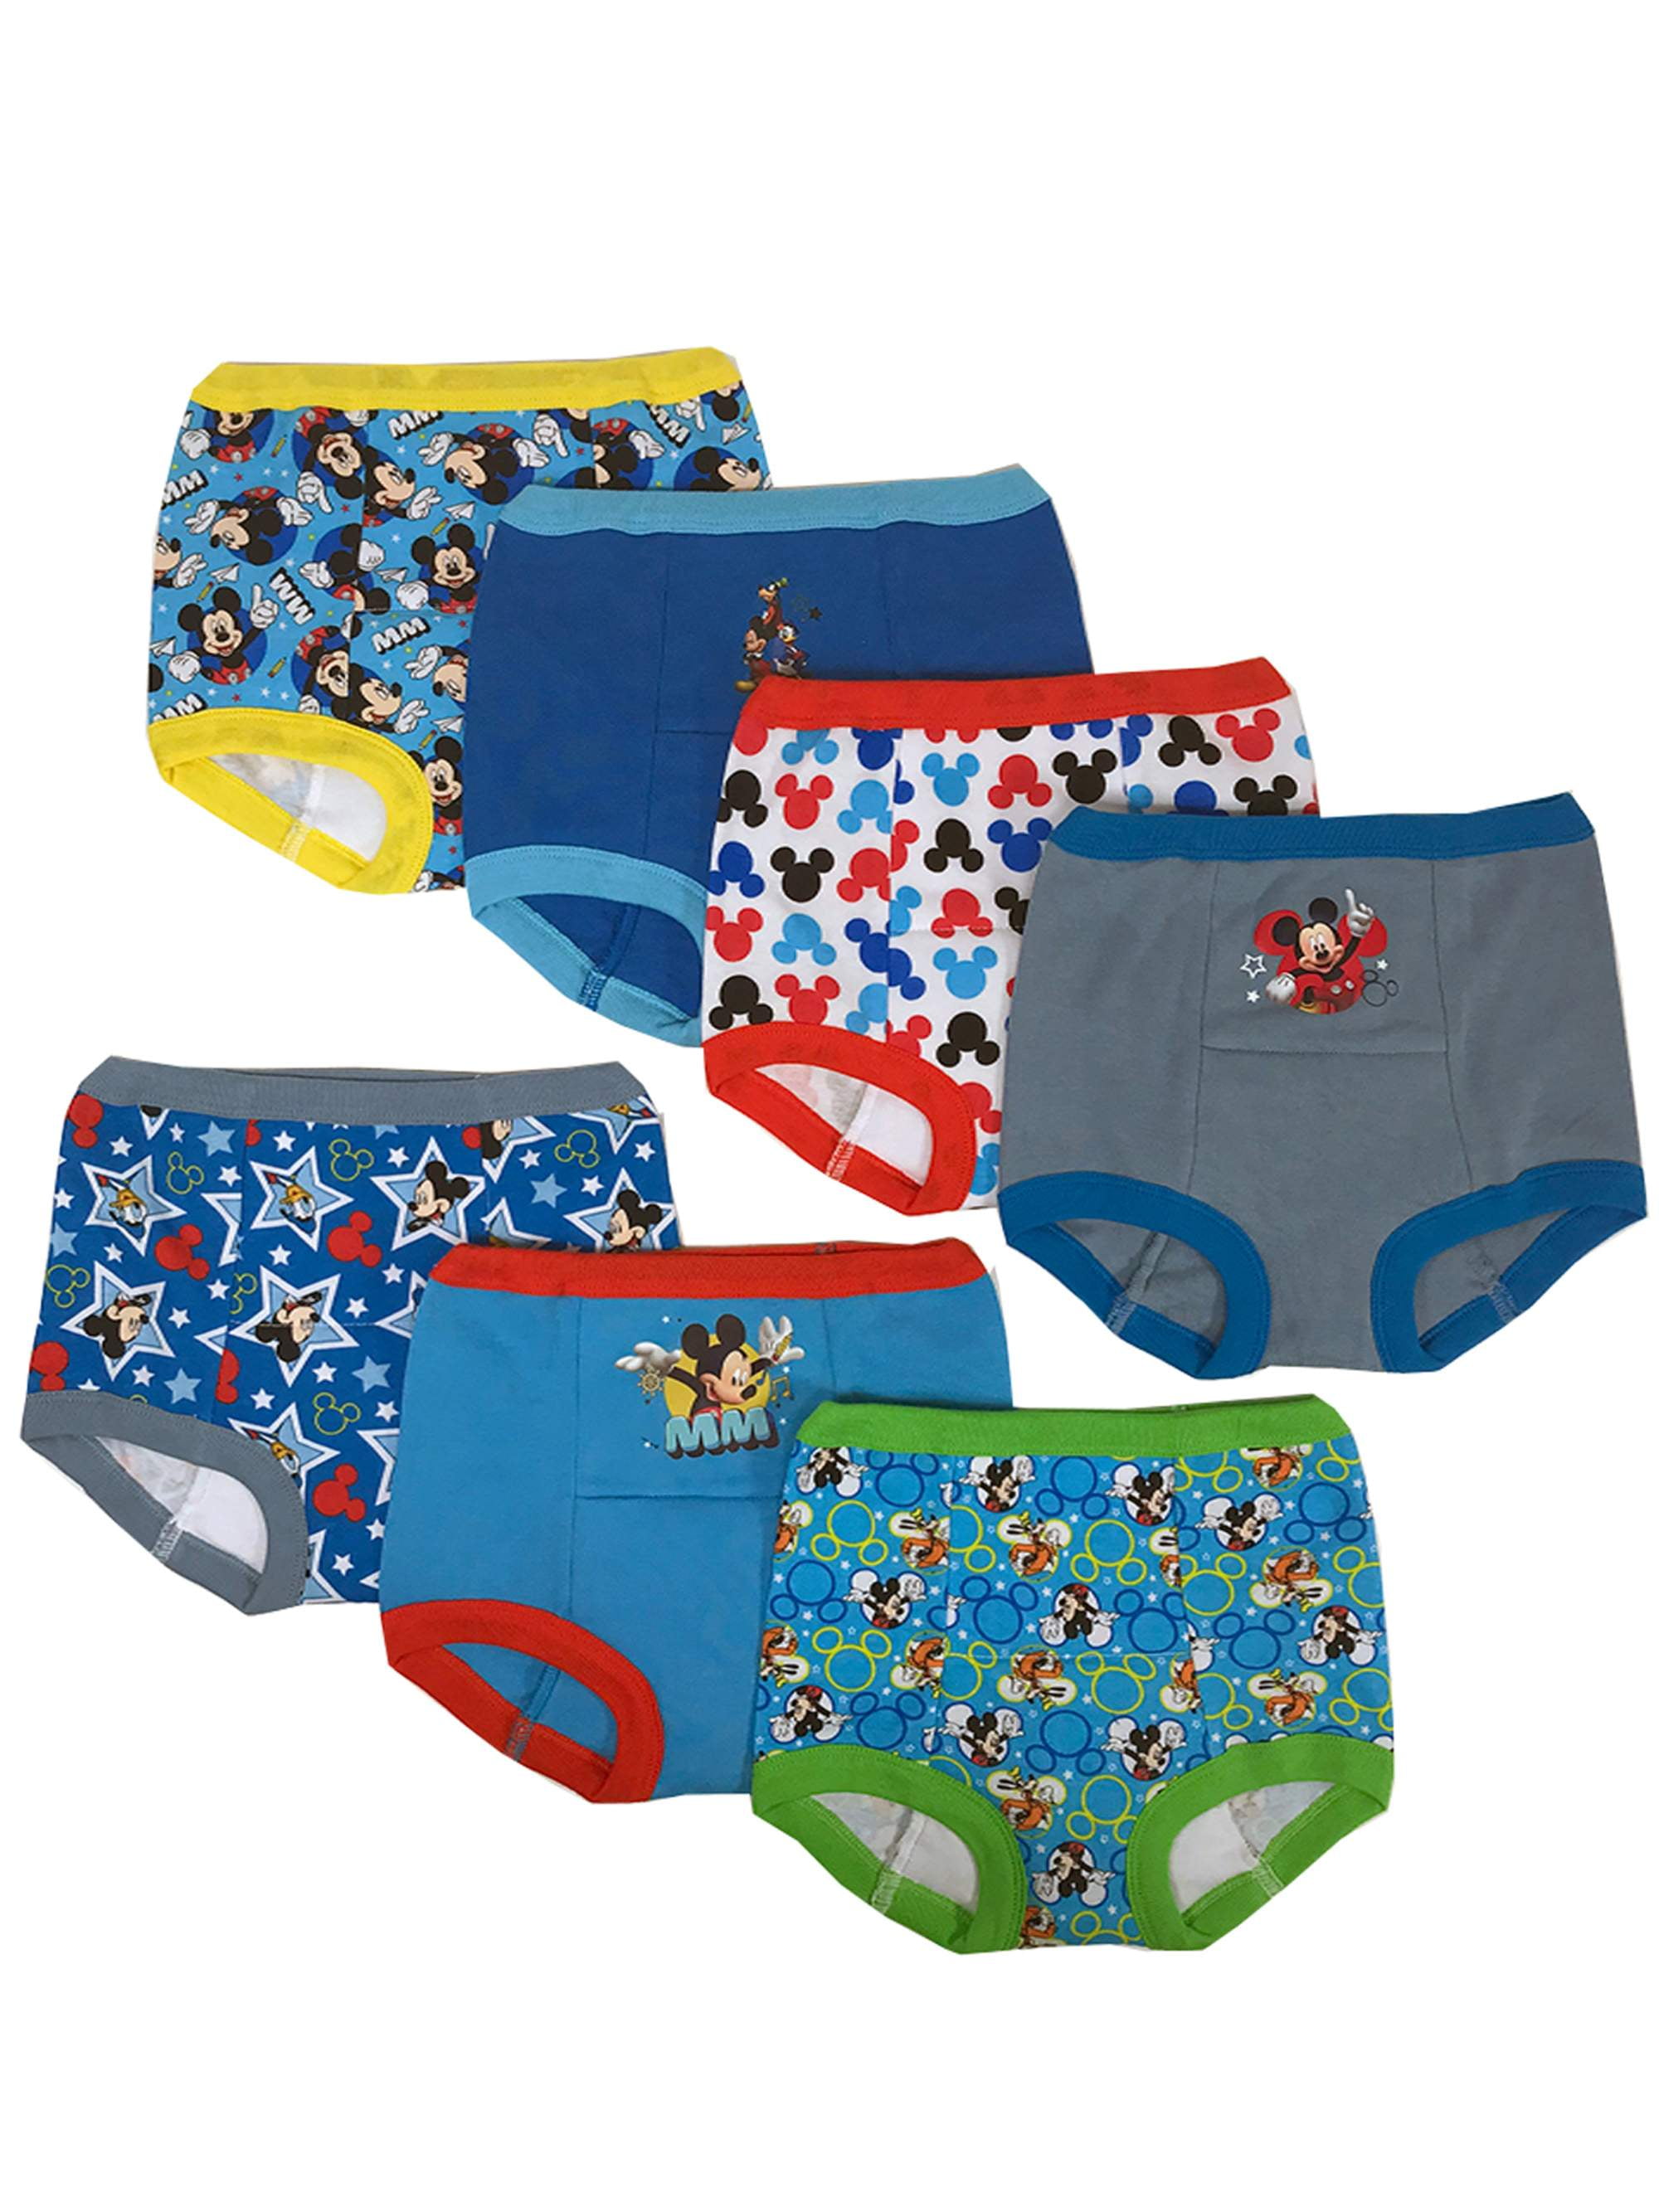 Mickey Mouse Toddler Boy Training Underwear, 7-Pack, Sizes 18M-4T 